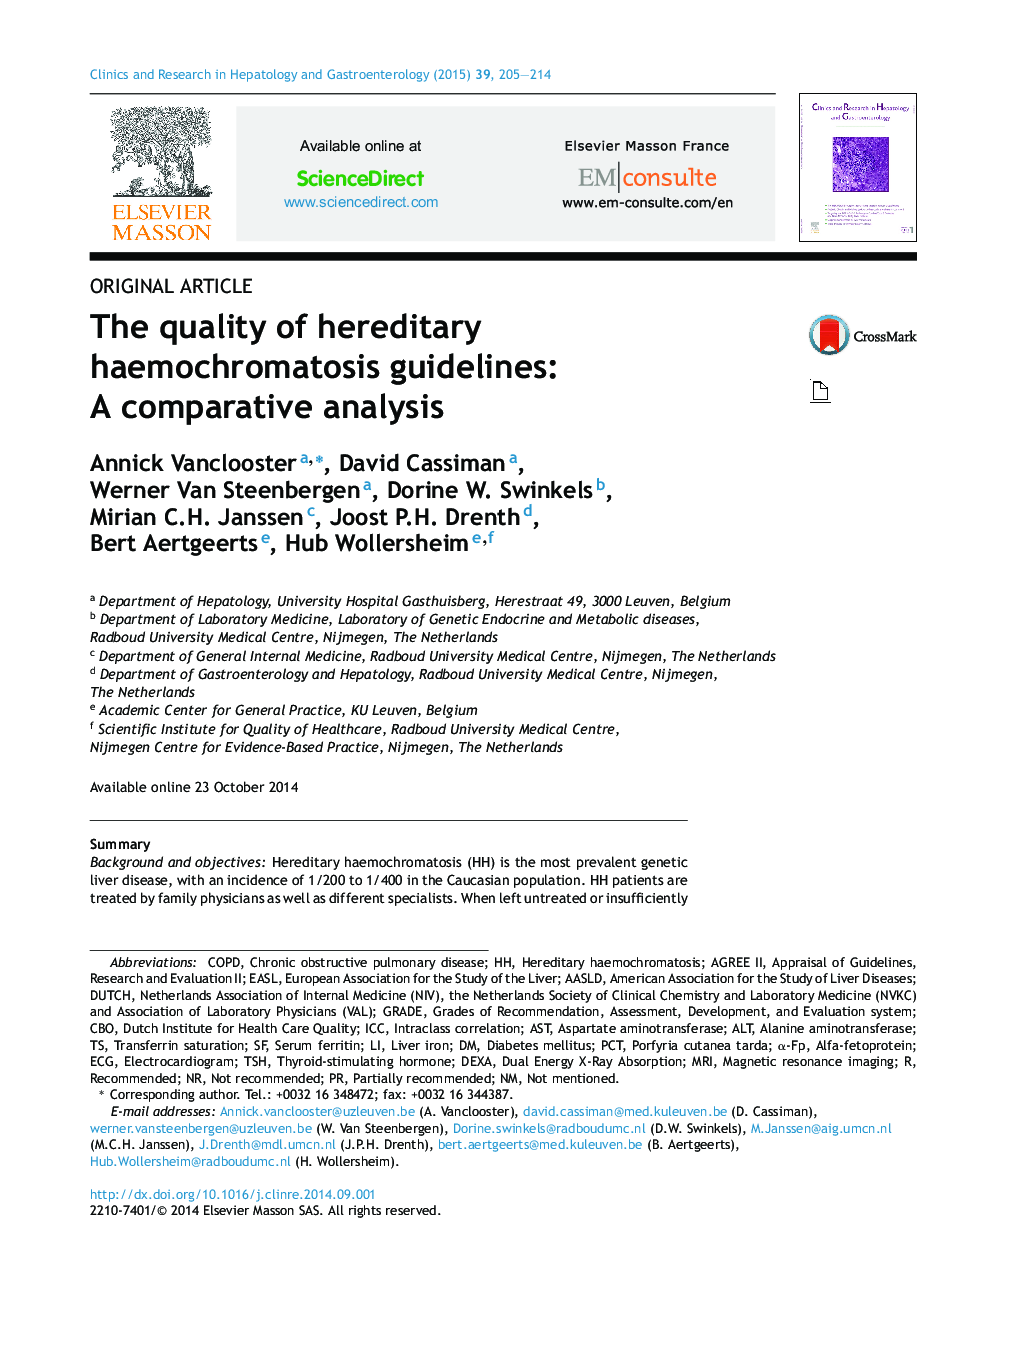 The quality of hereditary haemochromatosis guidelines: A comparative analysis